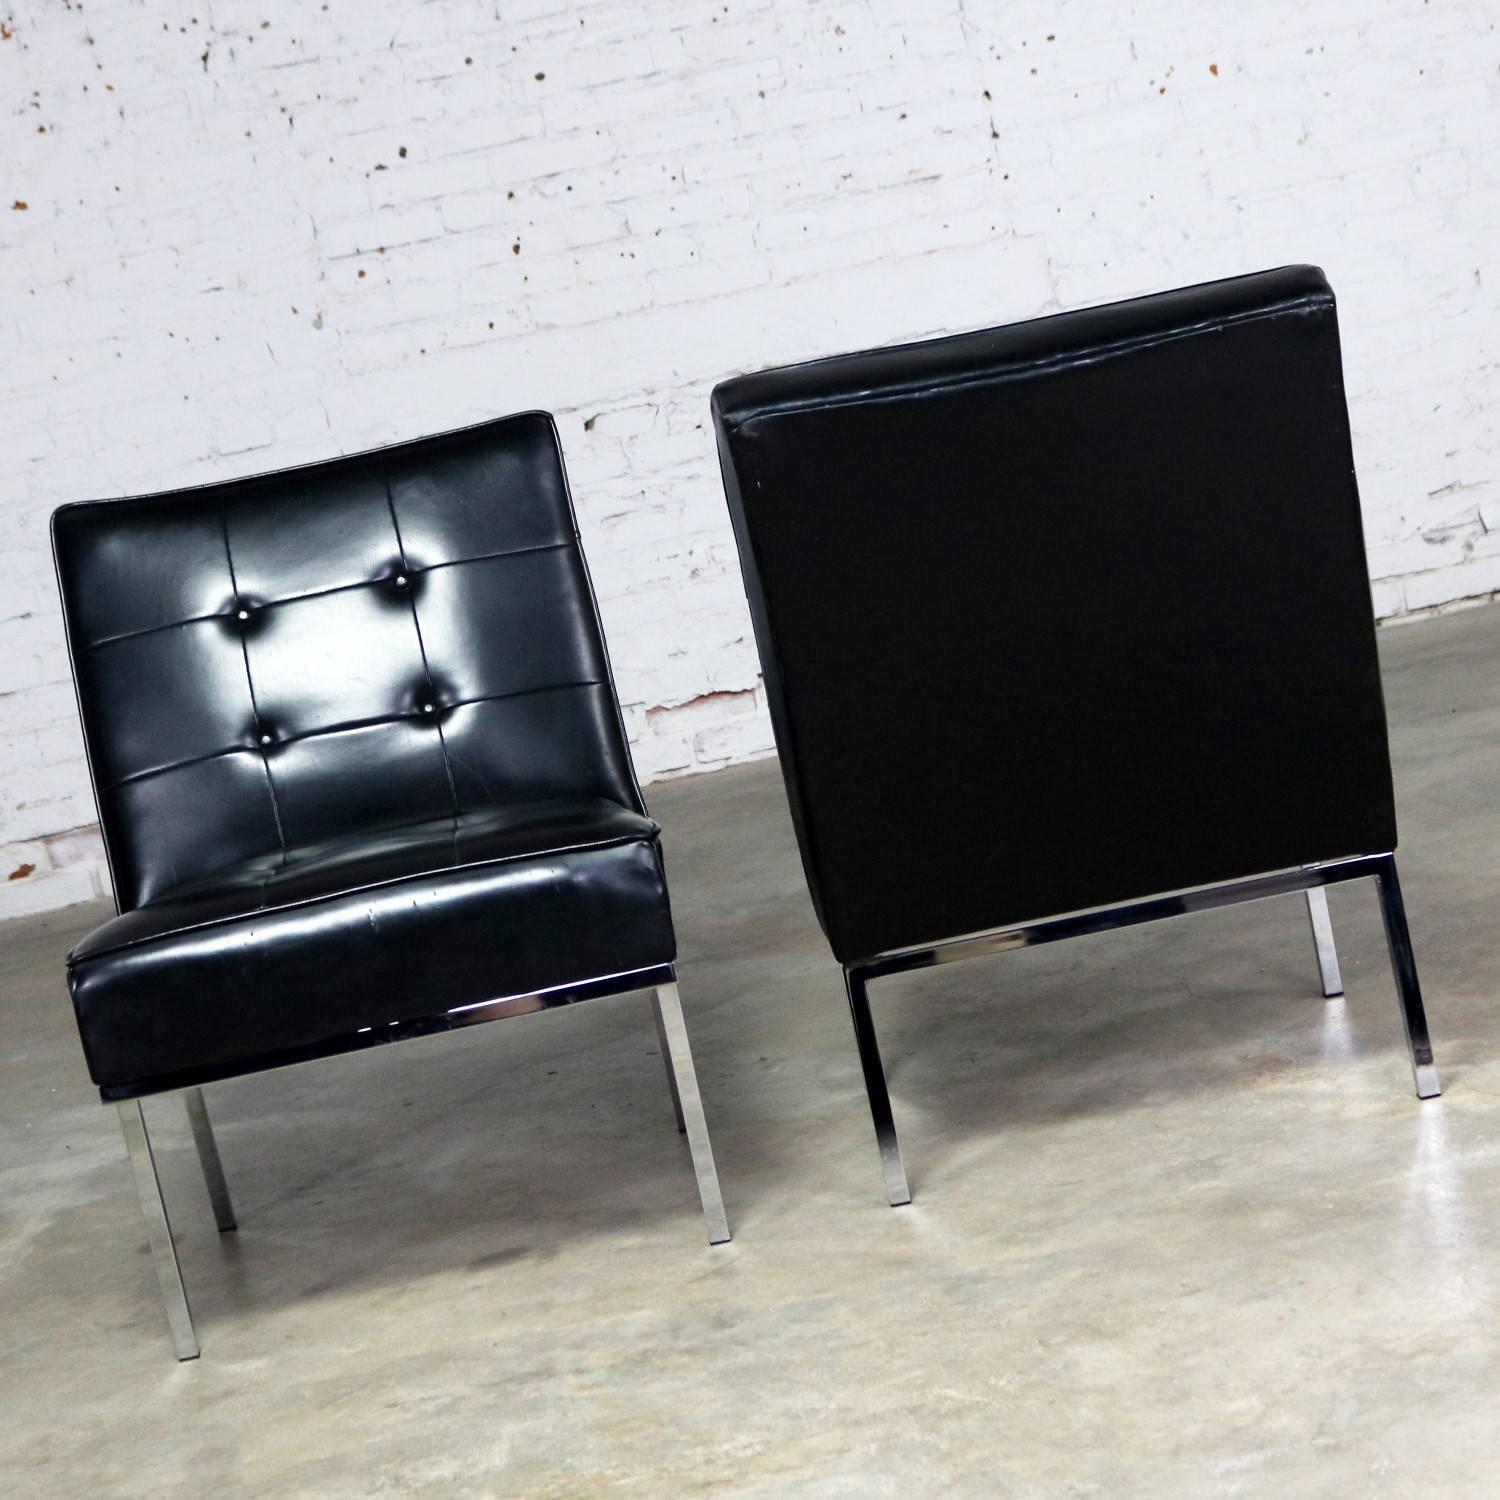 Paoli Chair Co. Black Naugahyde Chrome MCM Slipper Chairs Style Florence Knoll In Good Condition For Sale In Topeka, KS